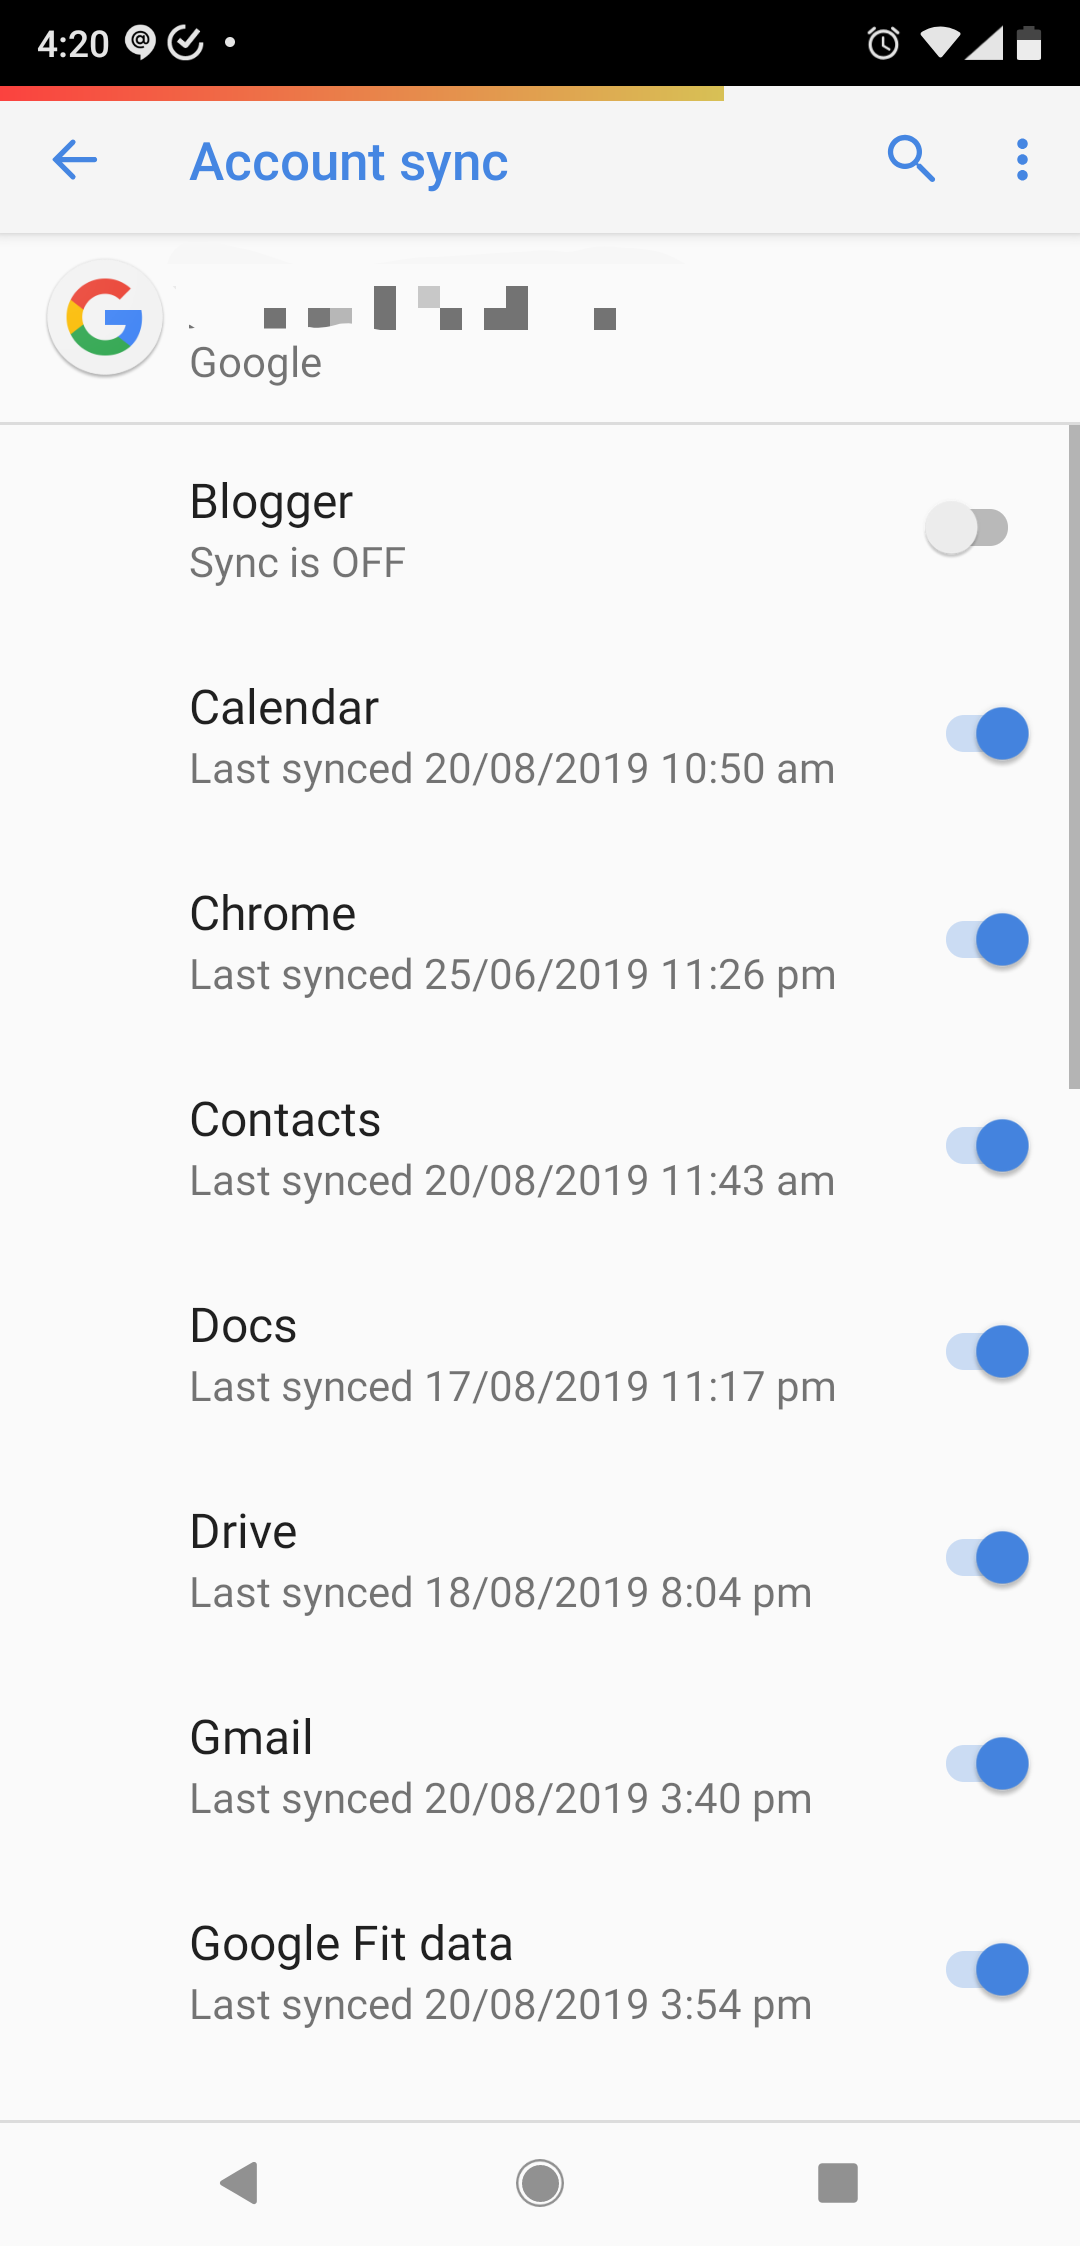 How Do I Store My Photos And Videos And Contacts To My Google